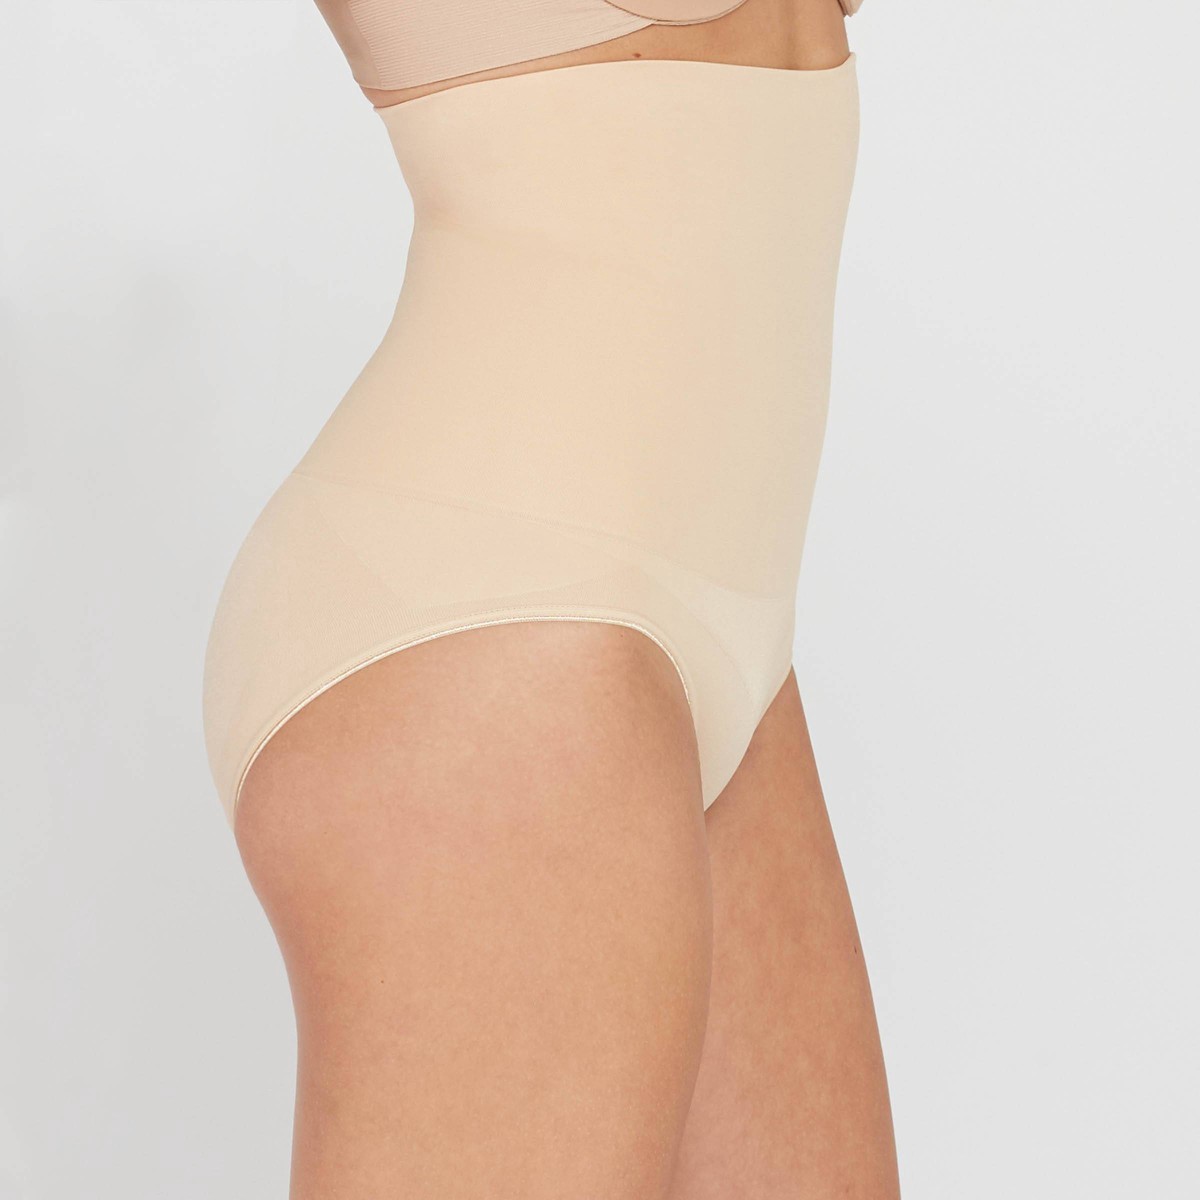 slide 3 of 3, ASSETS by Spanx Women's Remarkable Results High Waist Control Brief - Light Beige XL, 1 ct